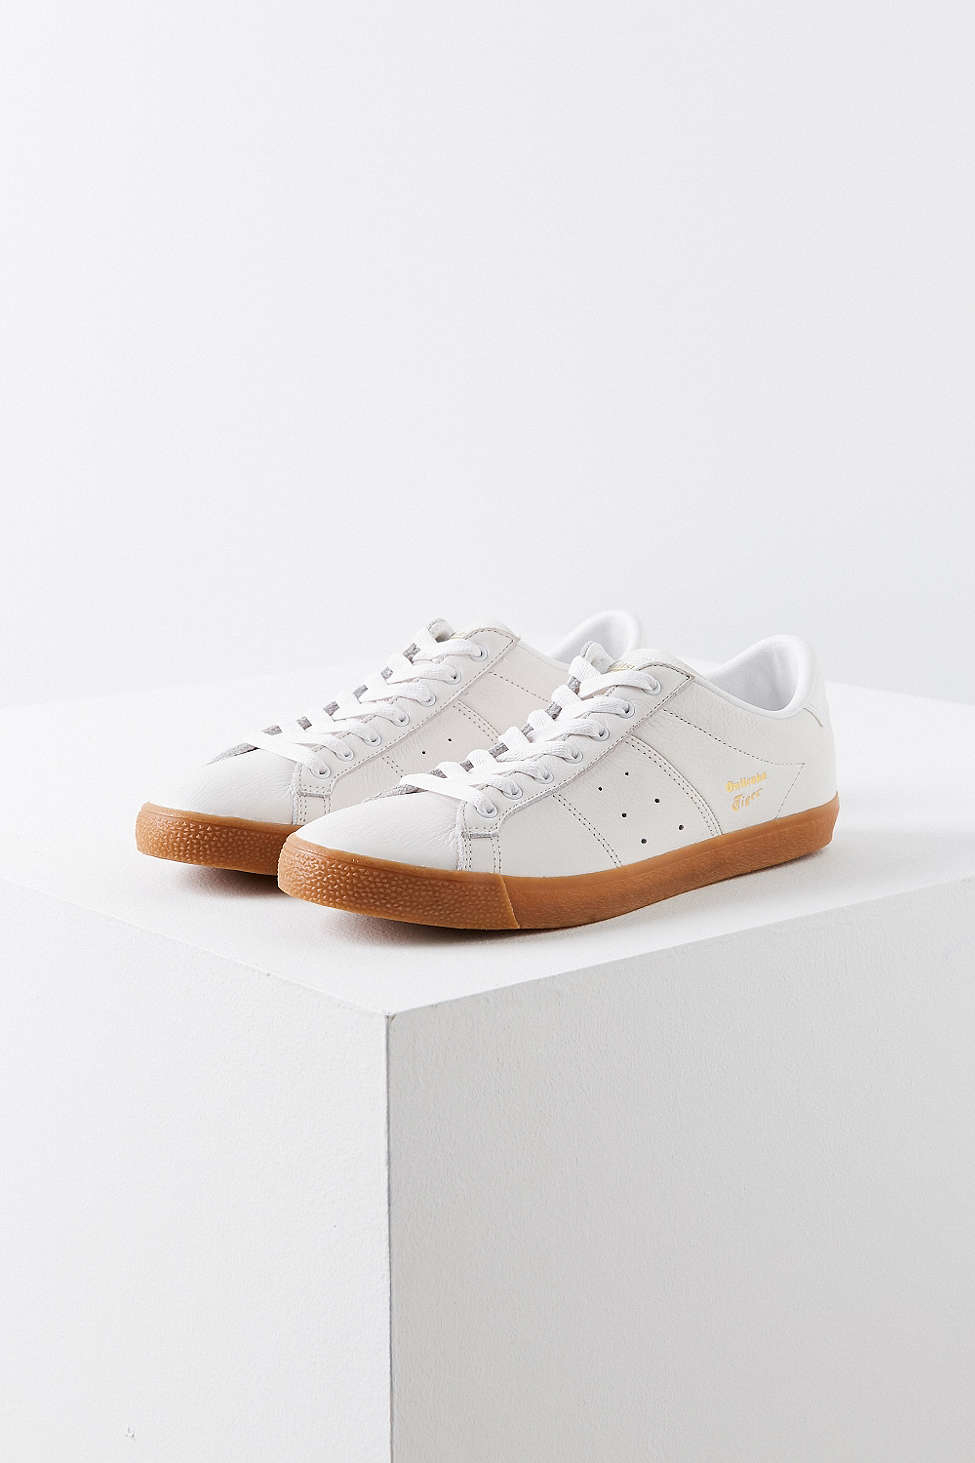 Asics Leather Onitsuka Tiger Lawnship Gum Sole Sneaker in White | Lyst